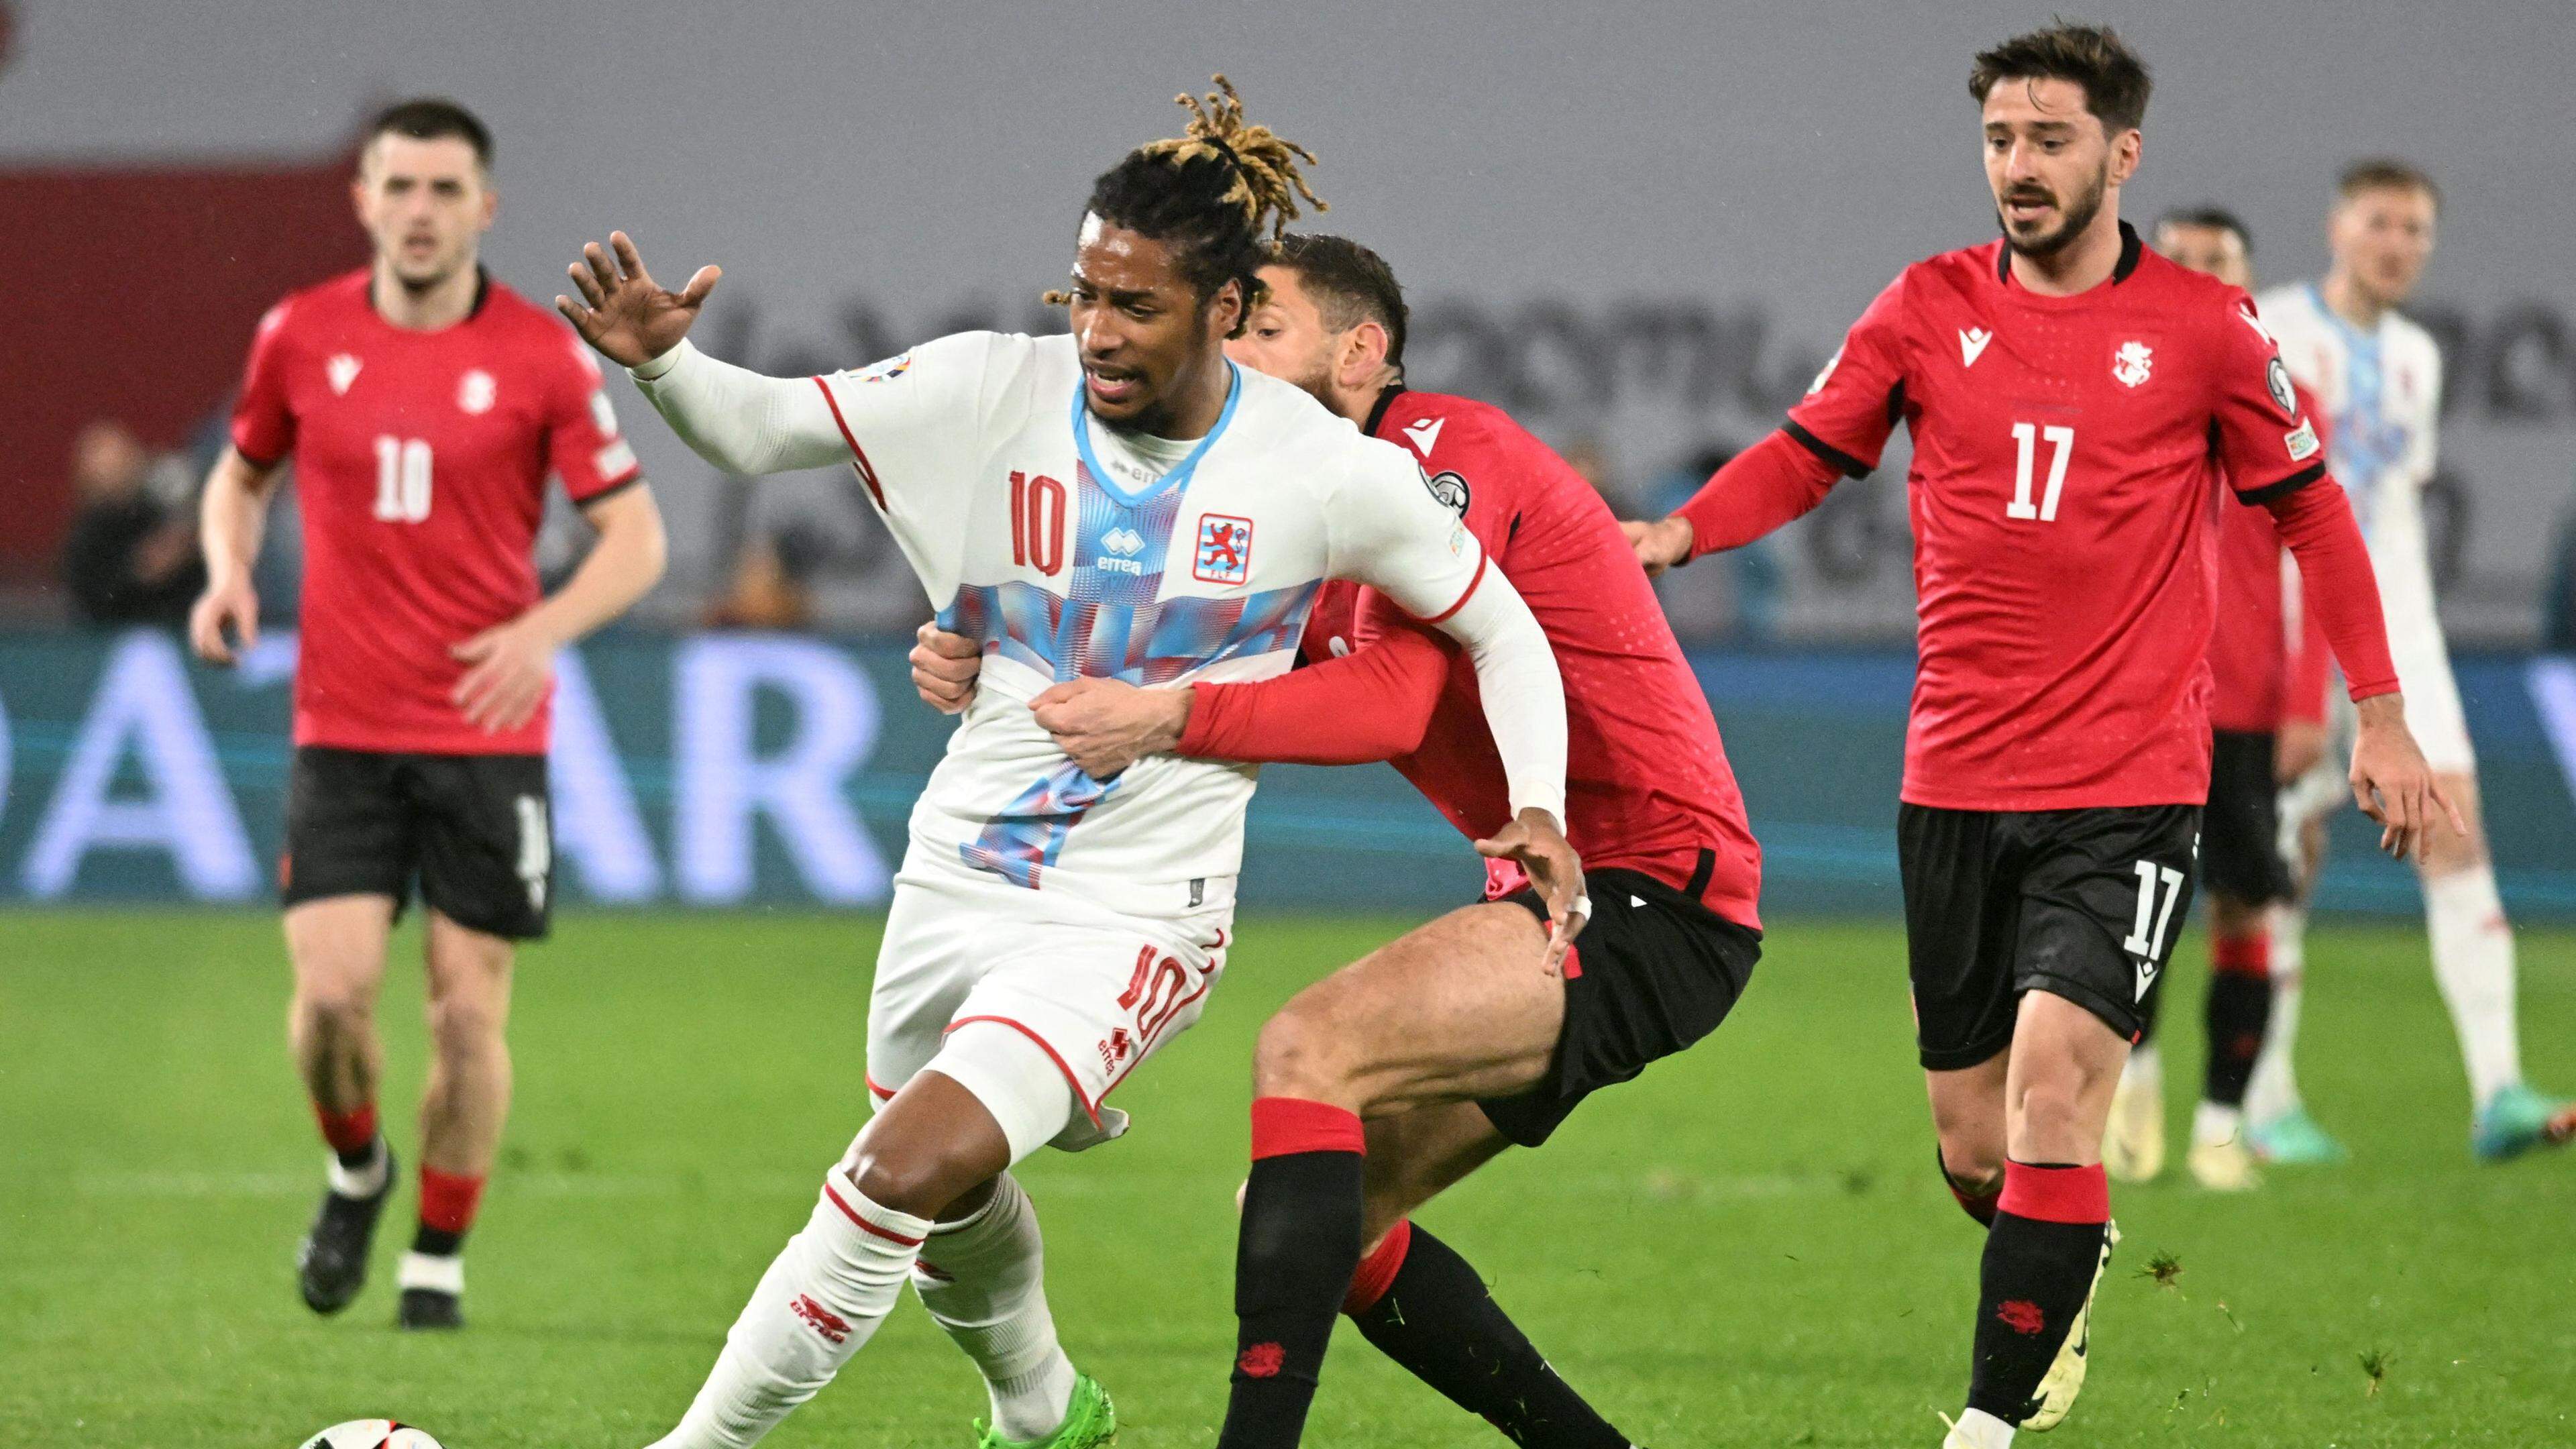 Luxembourg national team footballer Gerson Rodrigues in the white shirt pictures during last week's European Championship qualifier against Georgia.